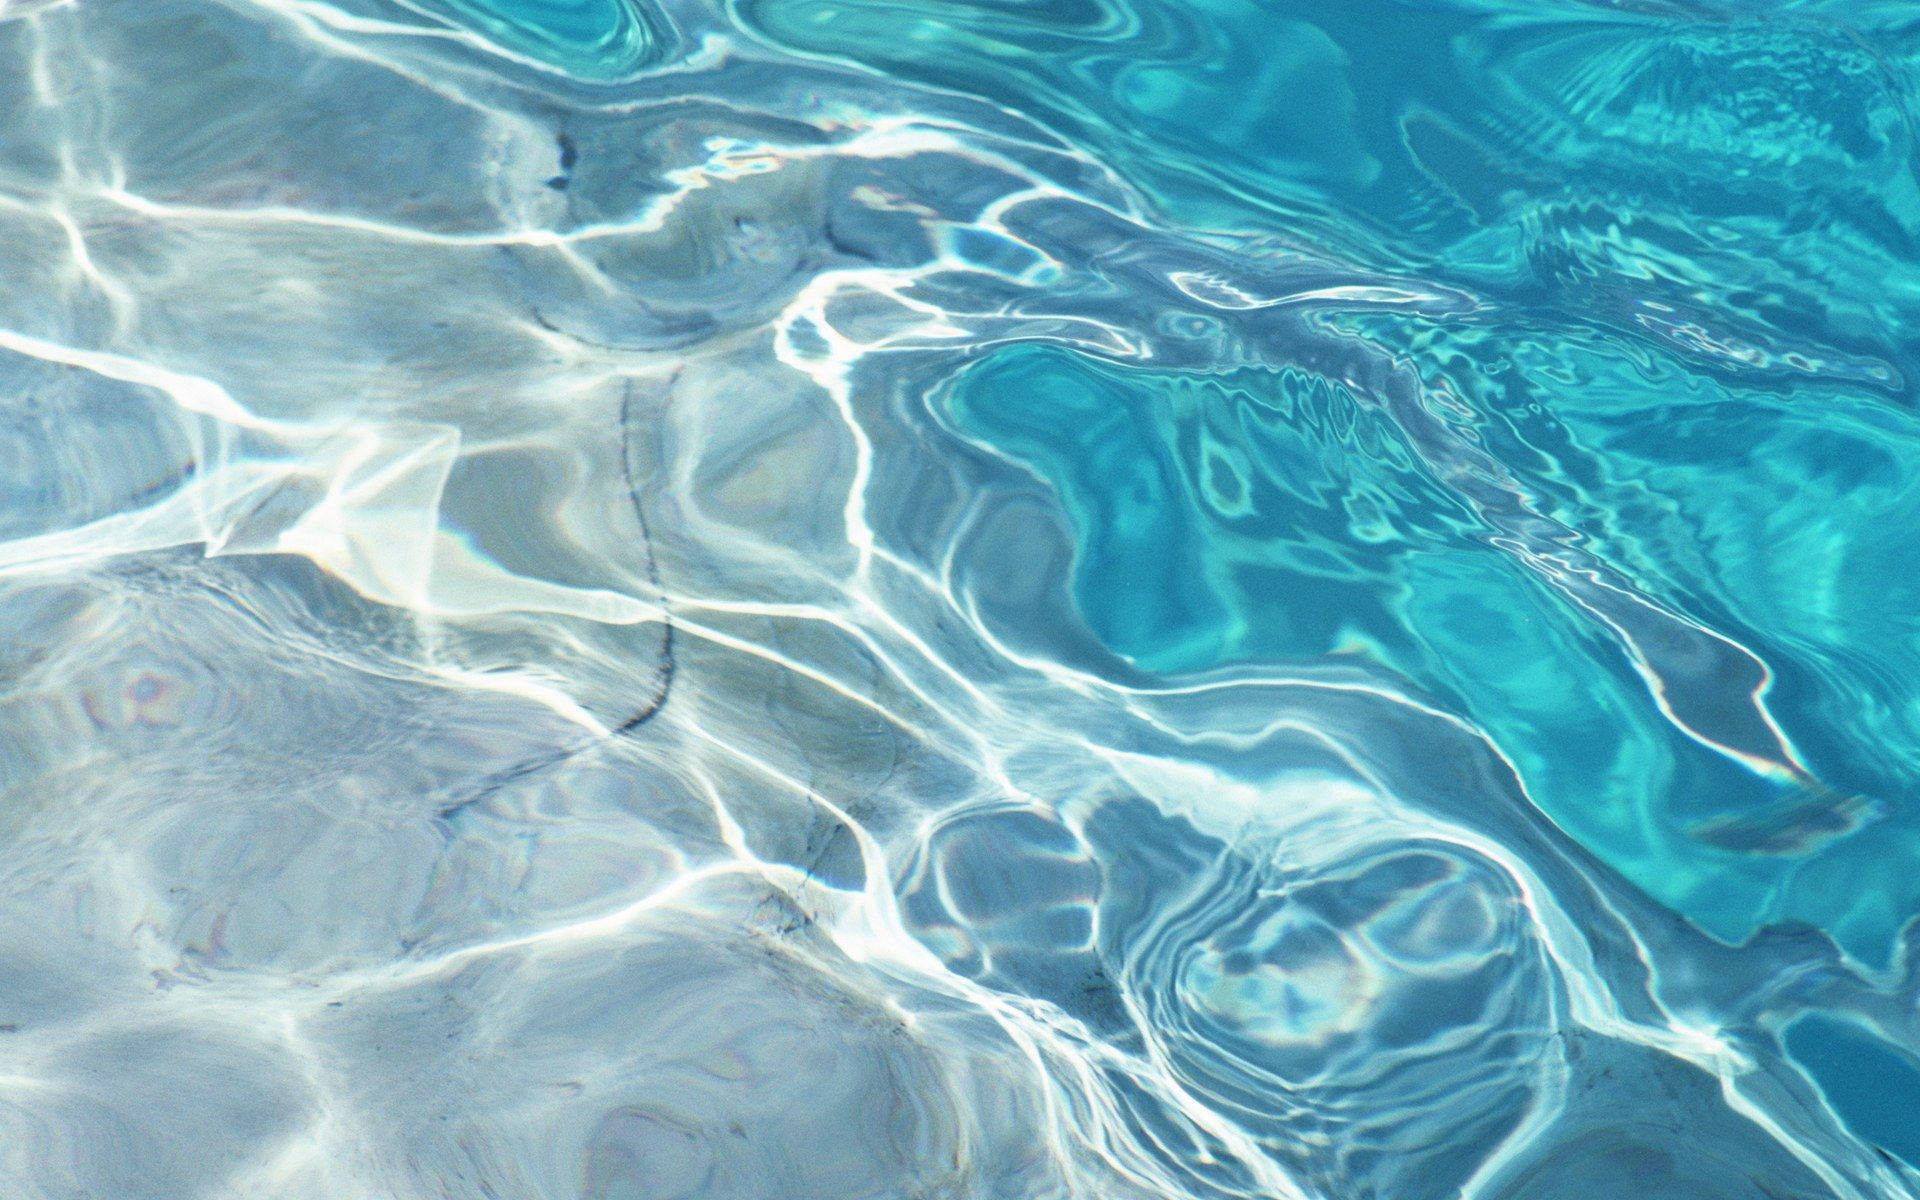 A close up of water in the pool - Turquoise